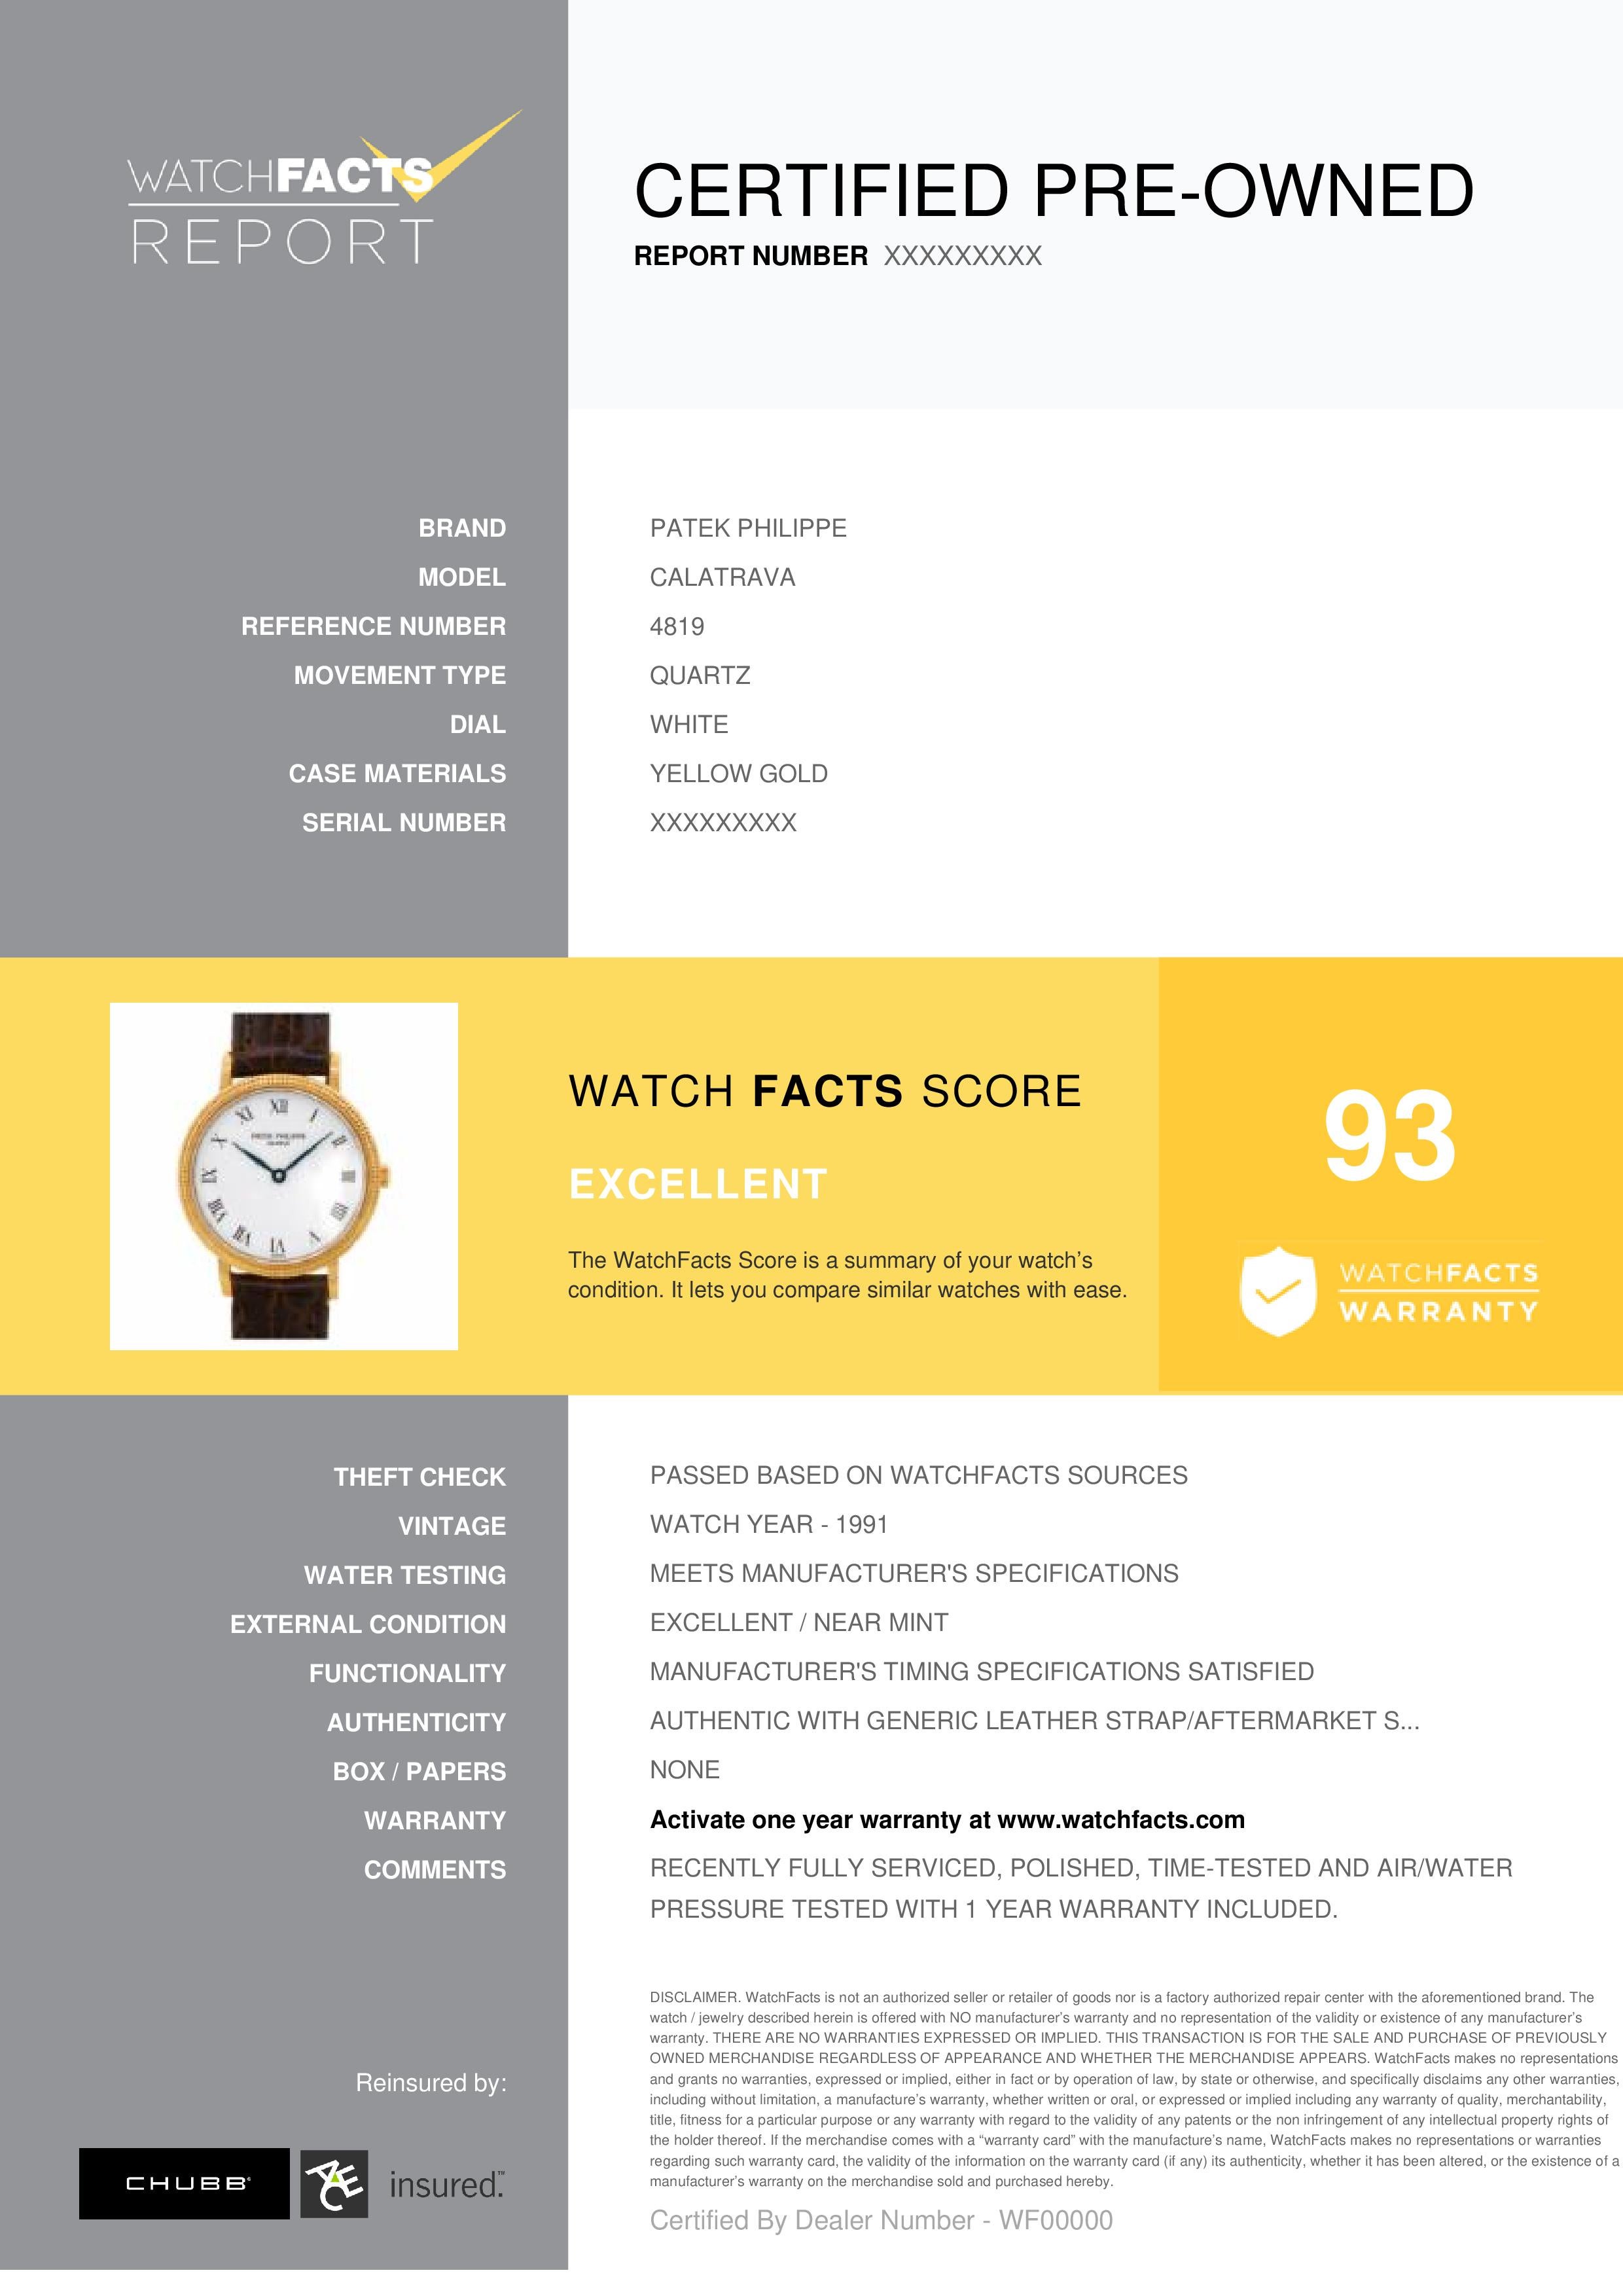 Patek Philippe Calatrava Reference #: 4819. Womens Quartz Watch Yellow Gold White 25 MM. Verified and Certified by WatchFacts. 1 year warranty offered by WatchFacts.
